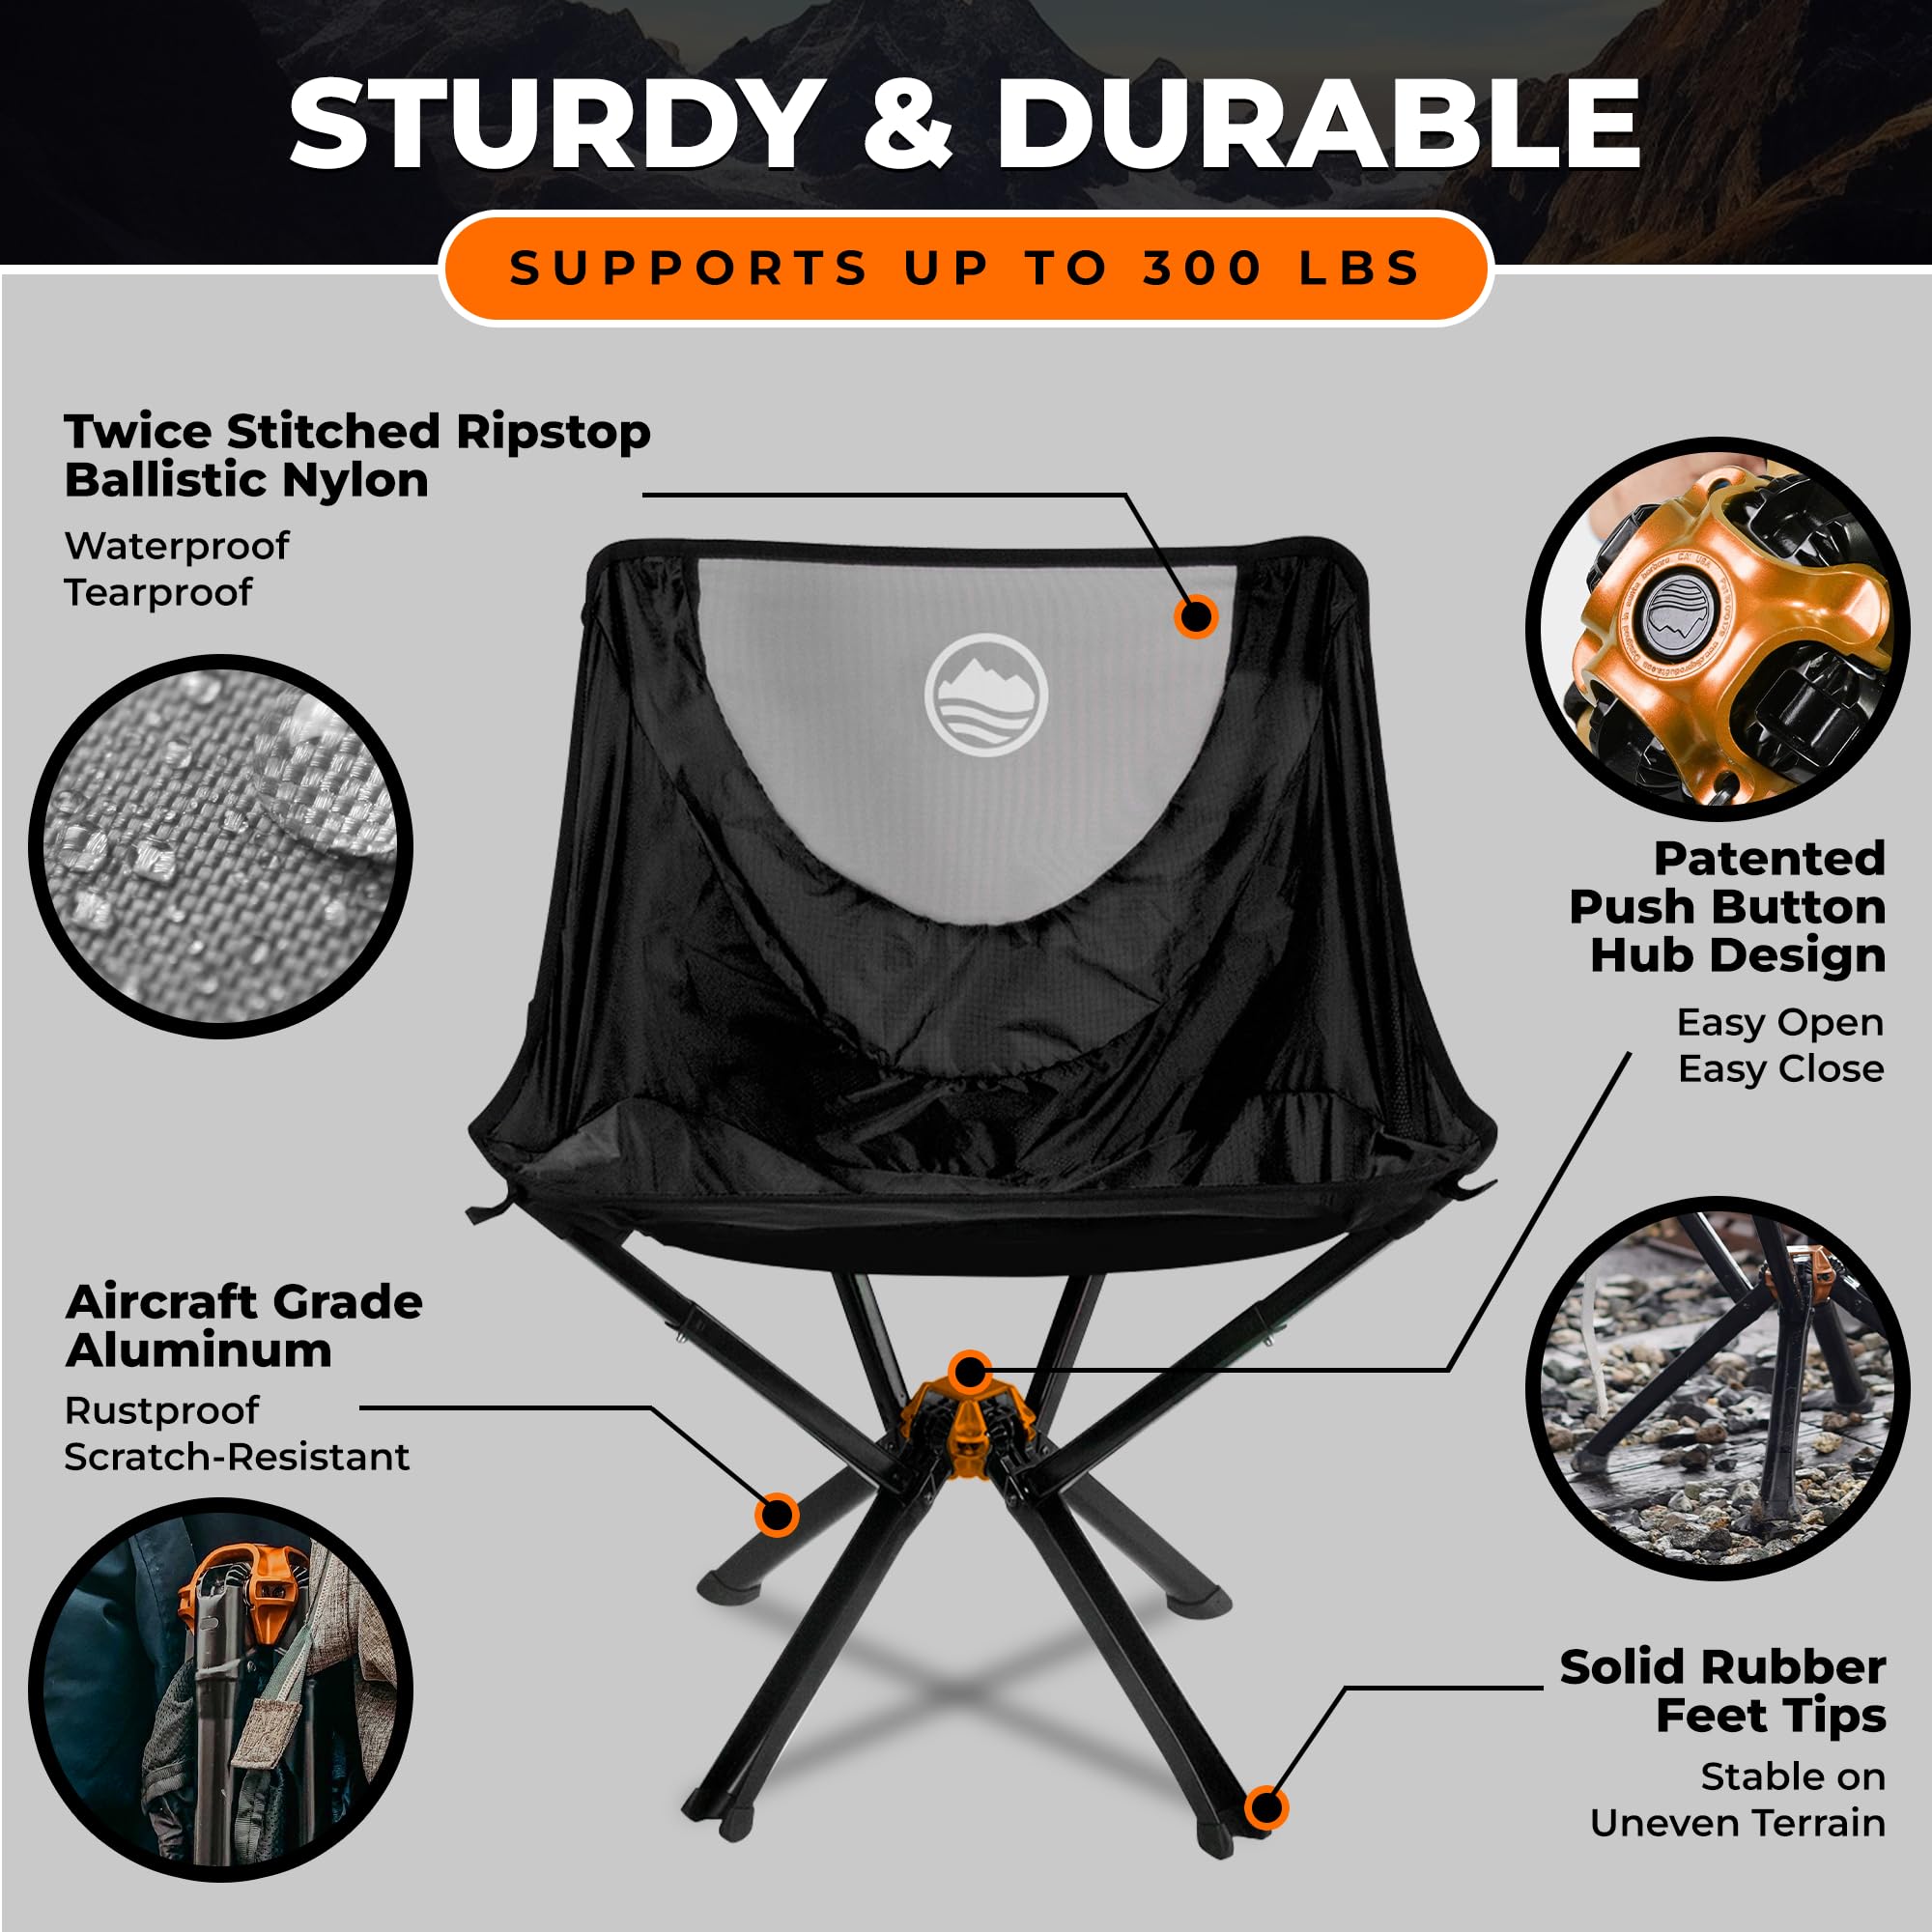 CLIQ Portable Chair Camping Chairs - A Small Collapsible Portable Chair That Goes Every Where Outdoors. Compact Folding Chair for Adults - Camping Chair Supports 300 Lbs